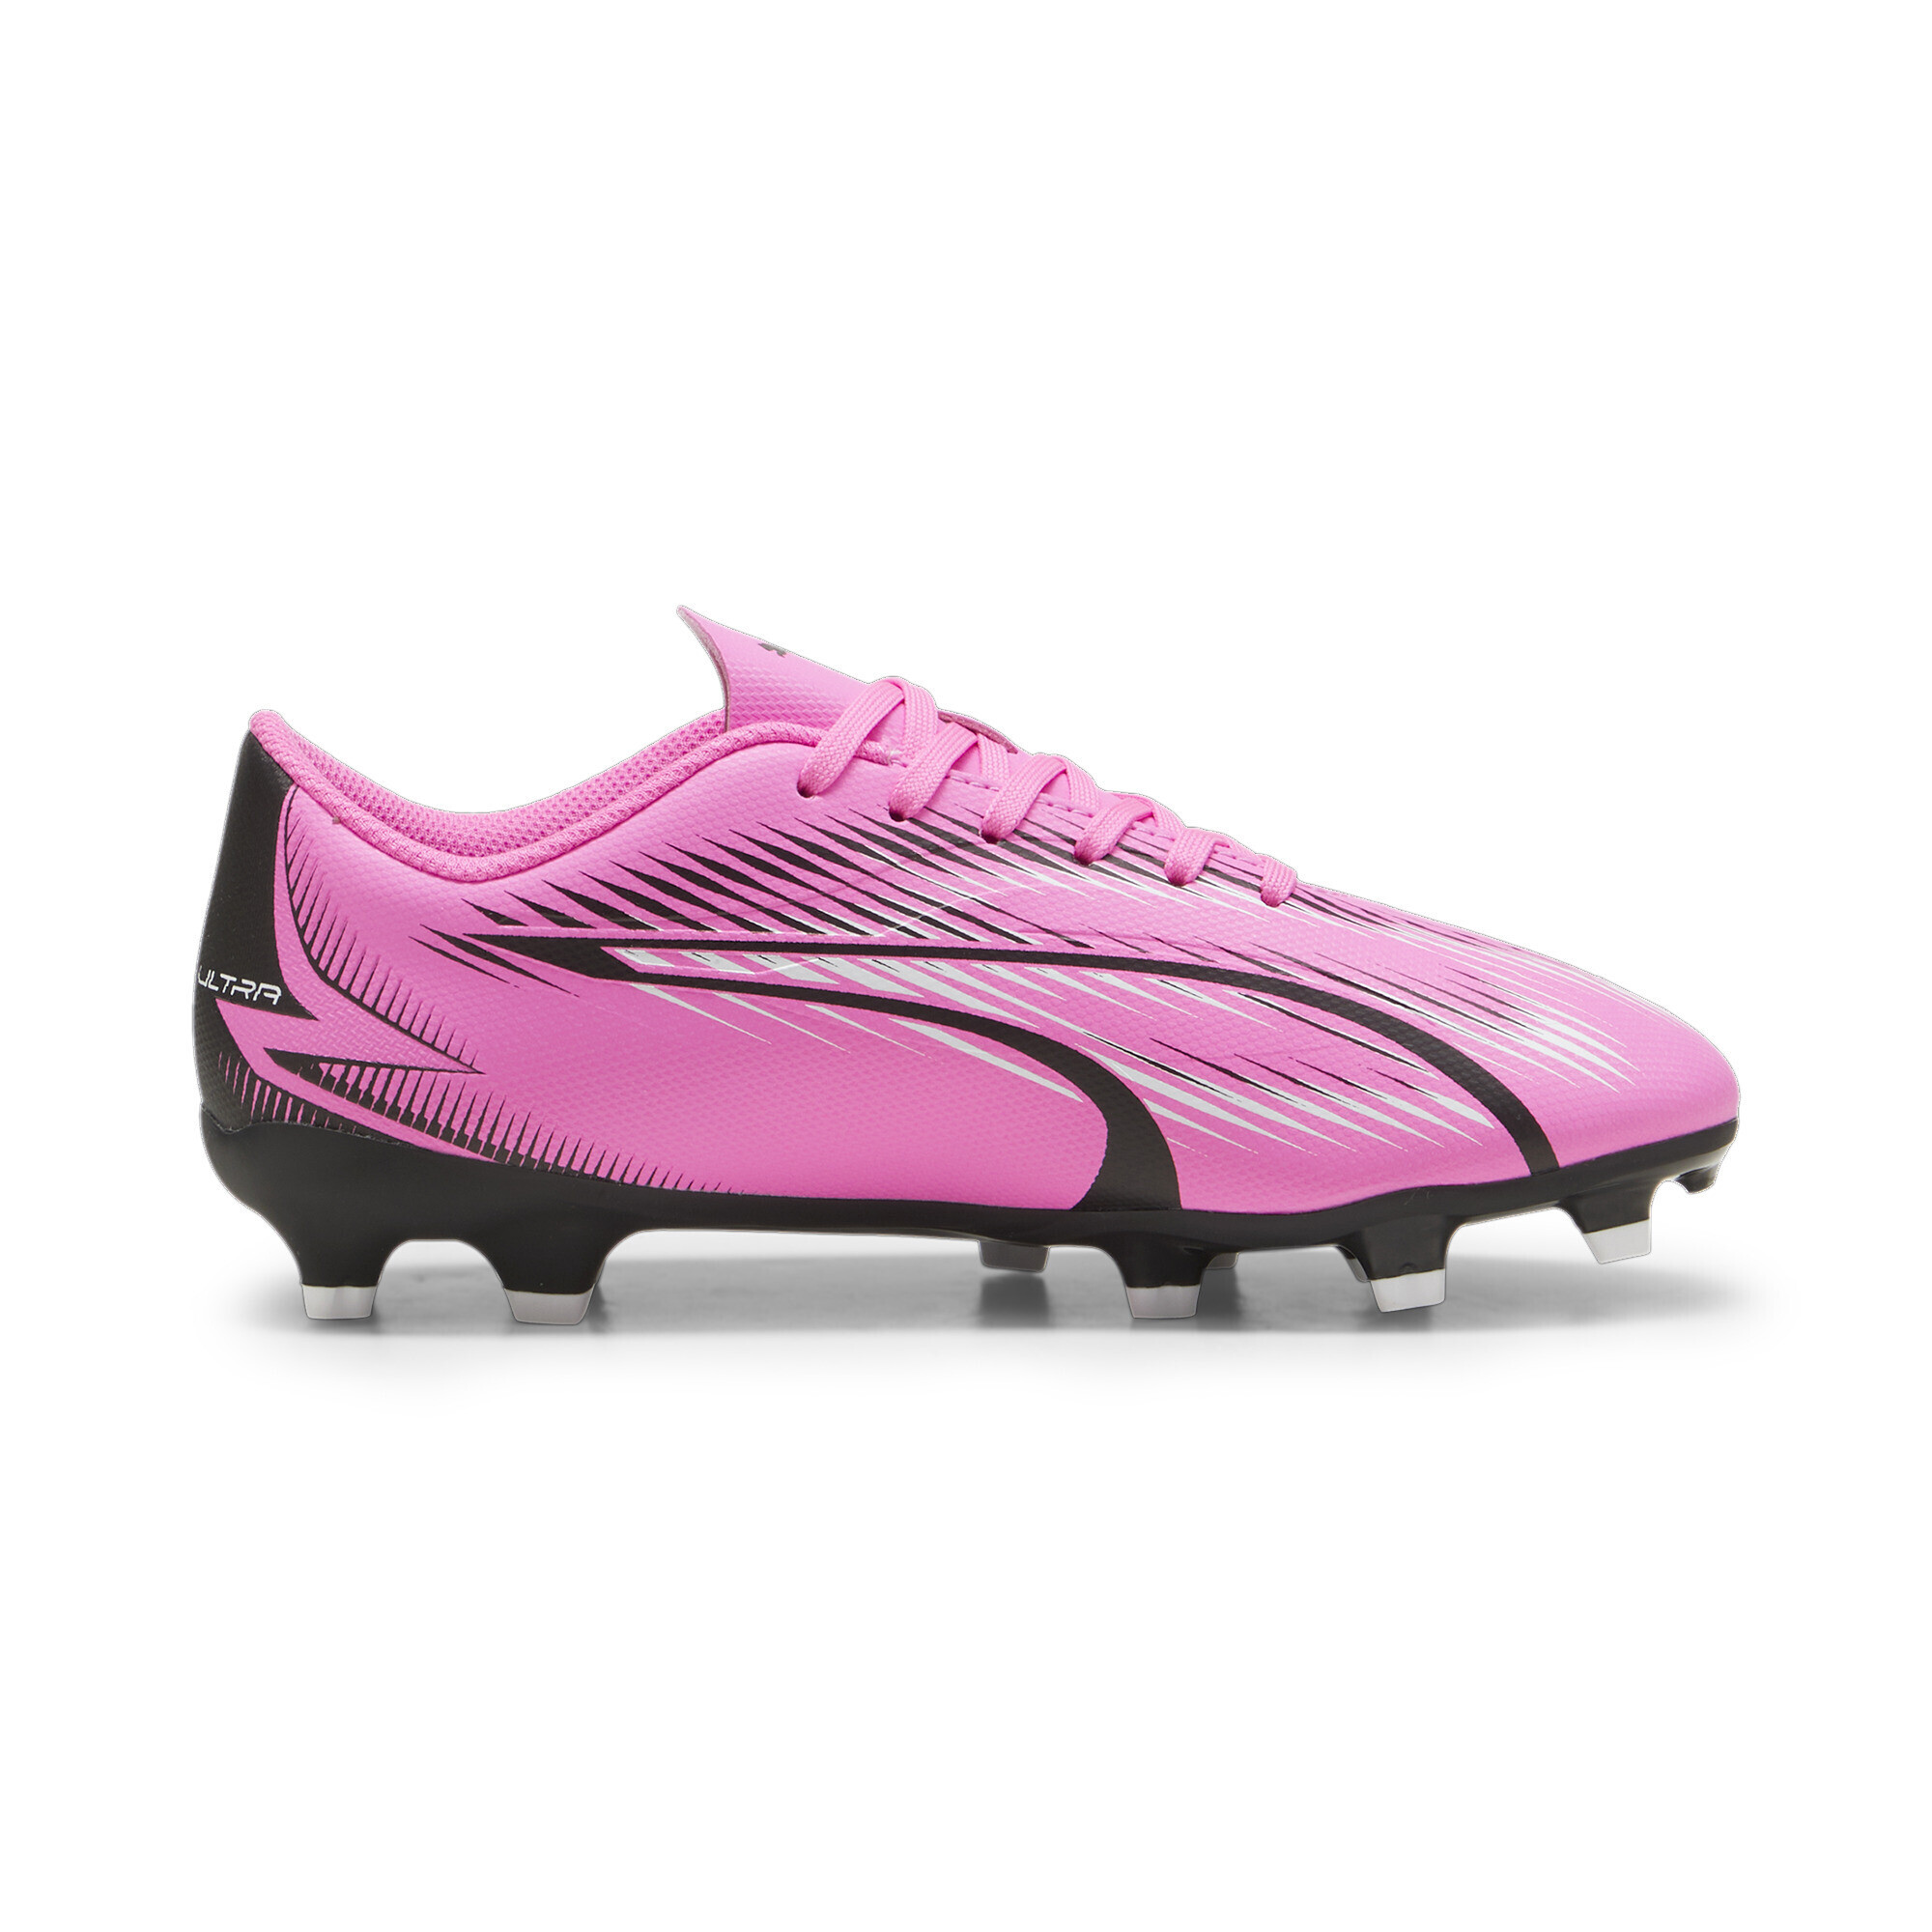 PUMA ULTRA PLAY FG/AG Youth Football Boots In Pink, Size EU 31.5